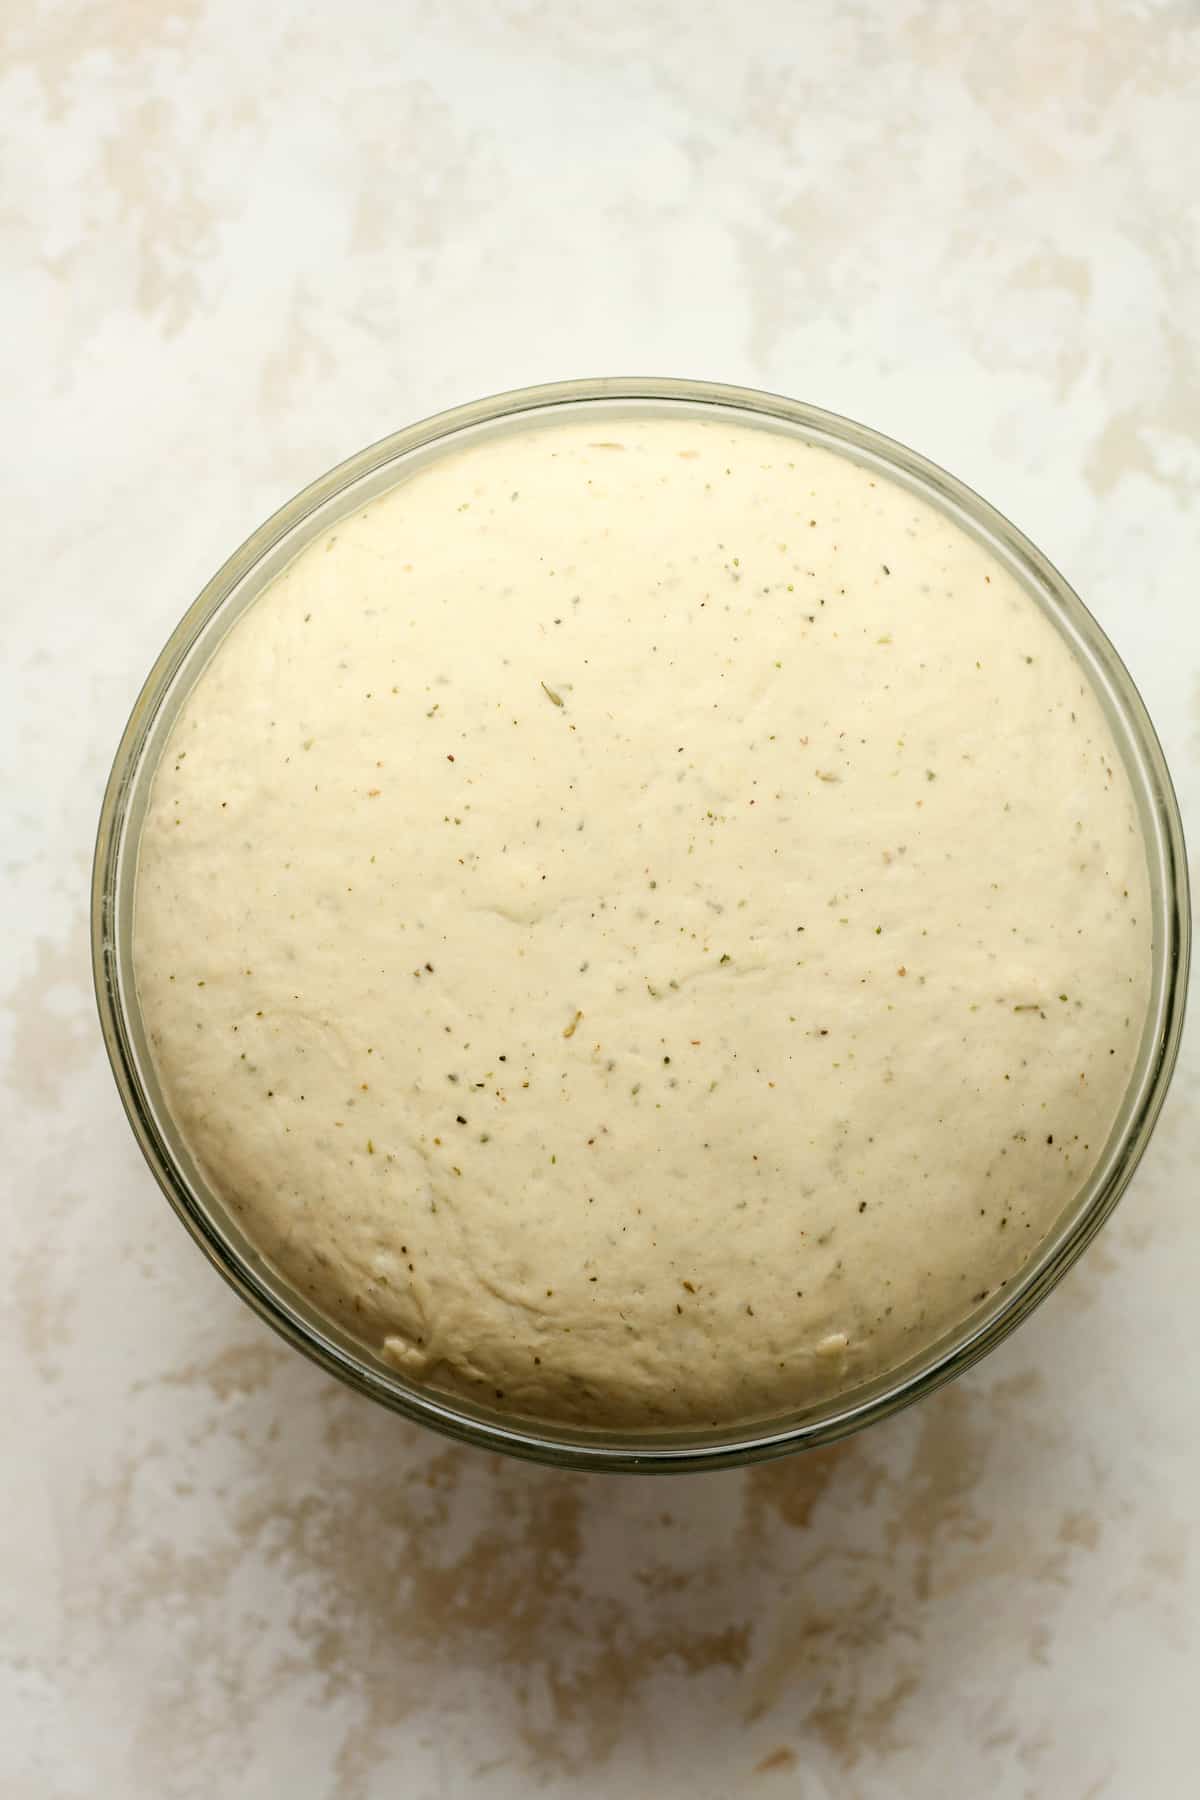 Overhead view of a bowl of raised dough.